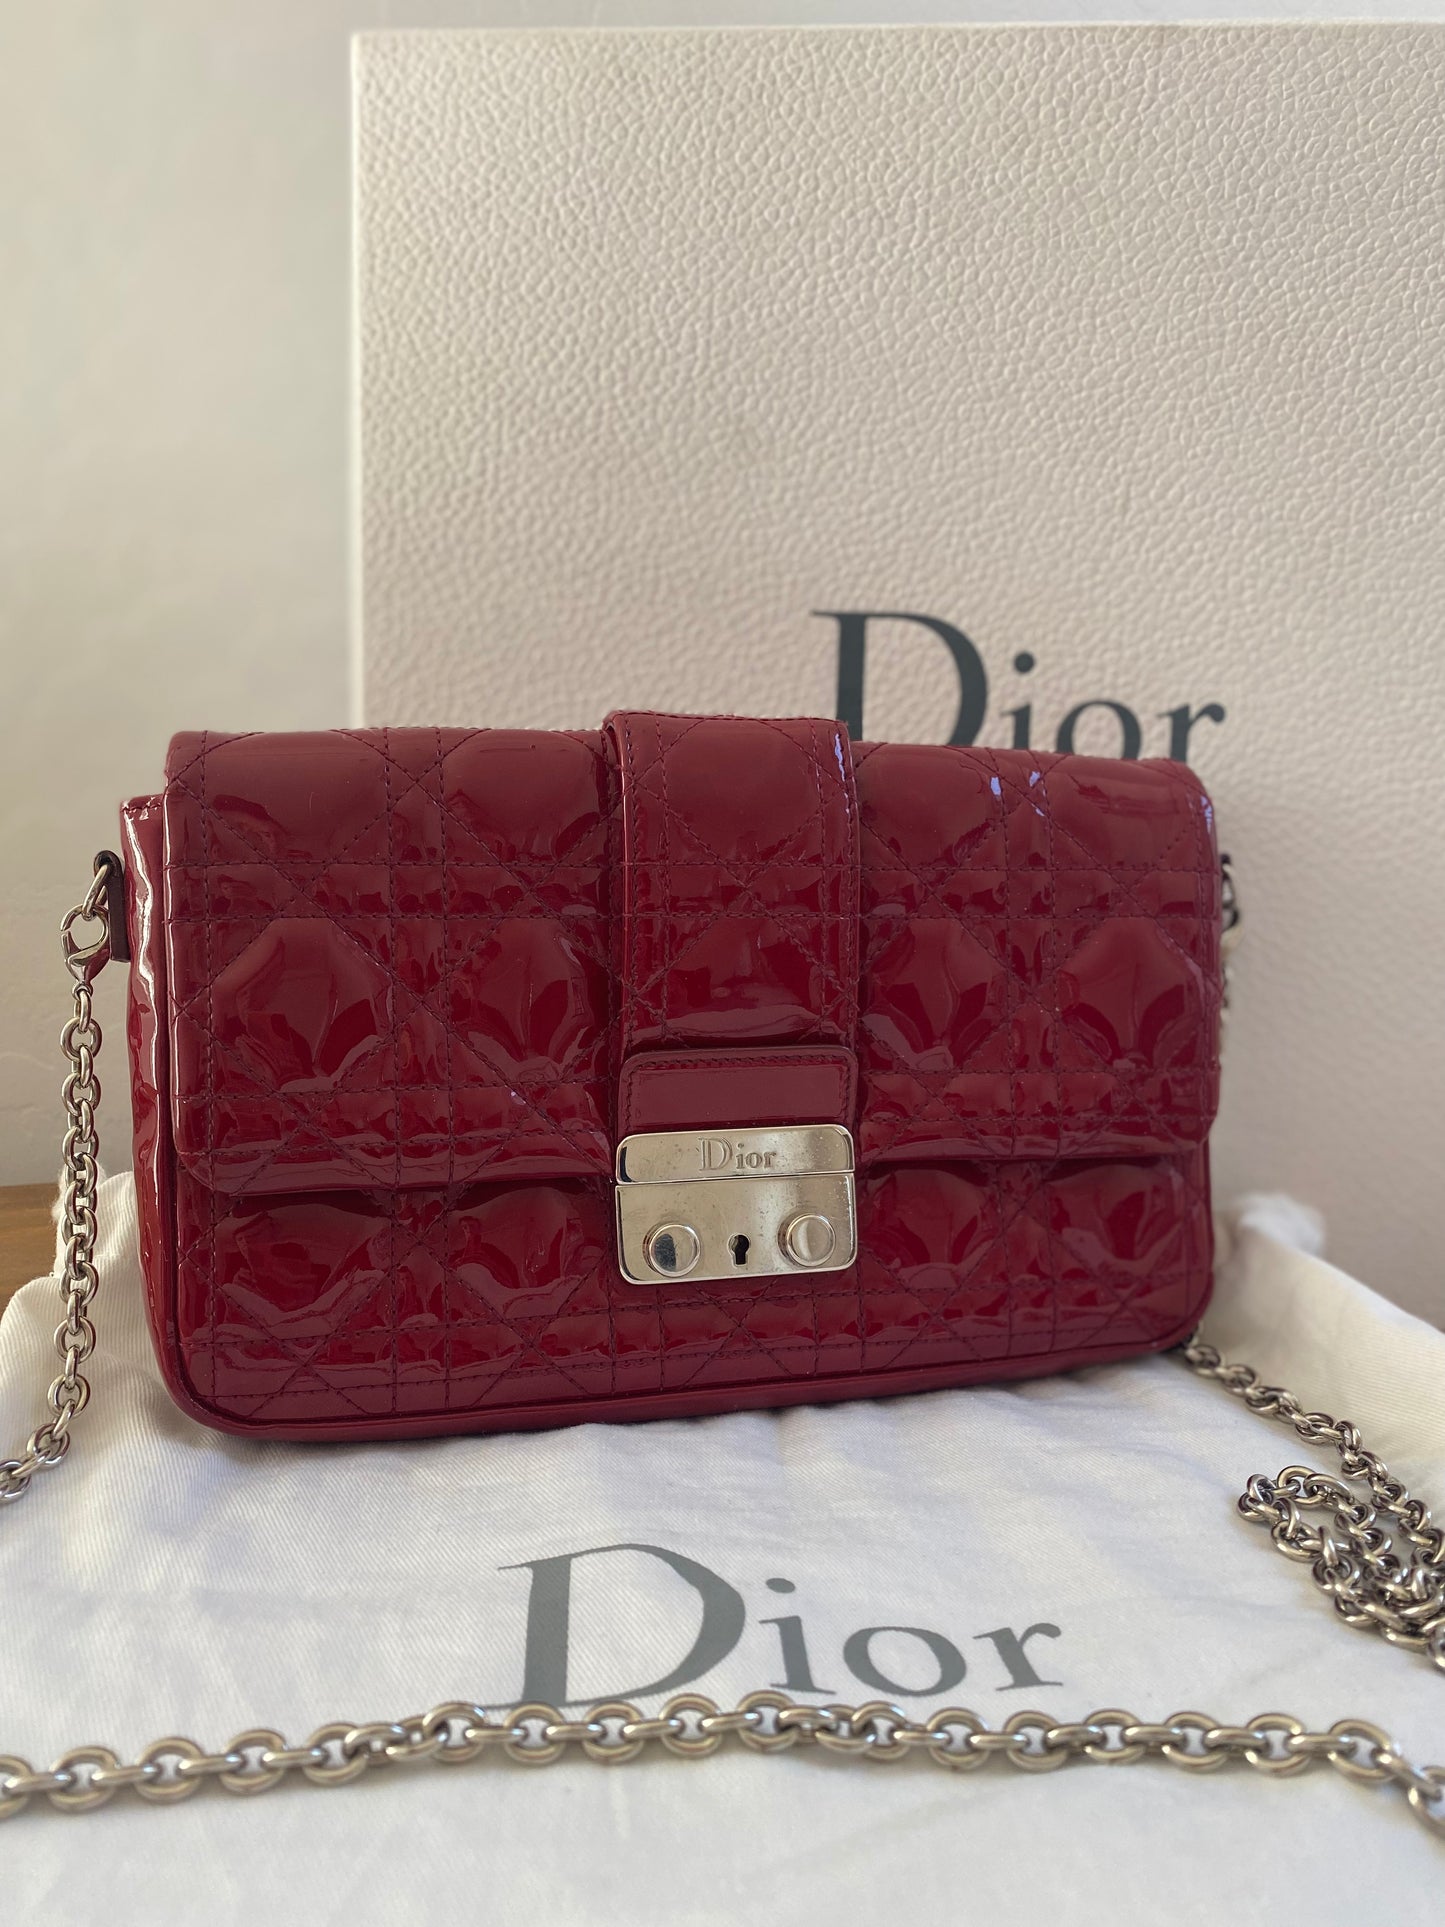 Dior Patent Leather Cannage Miss Dior Wallet on Chain Crossbody